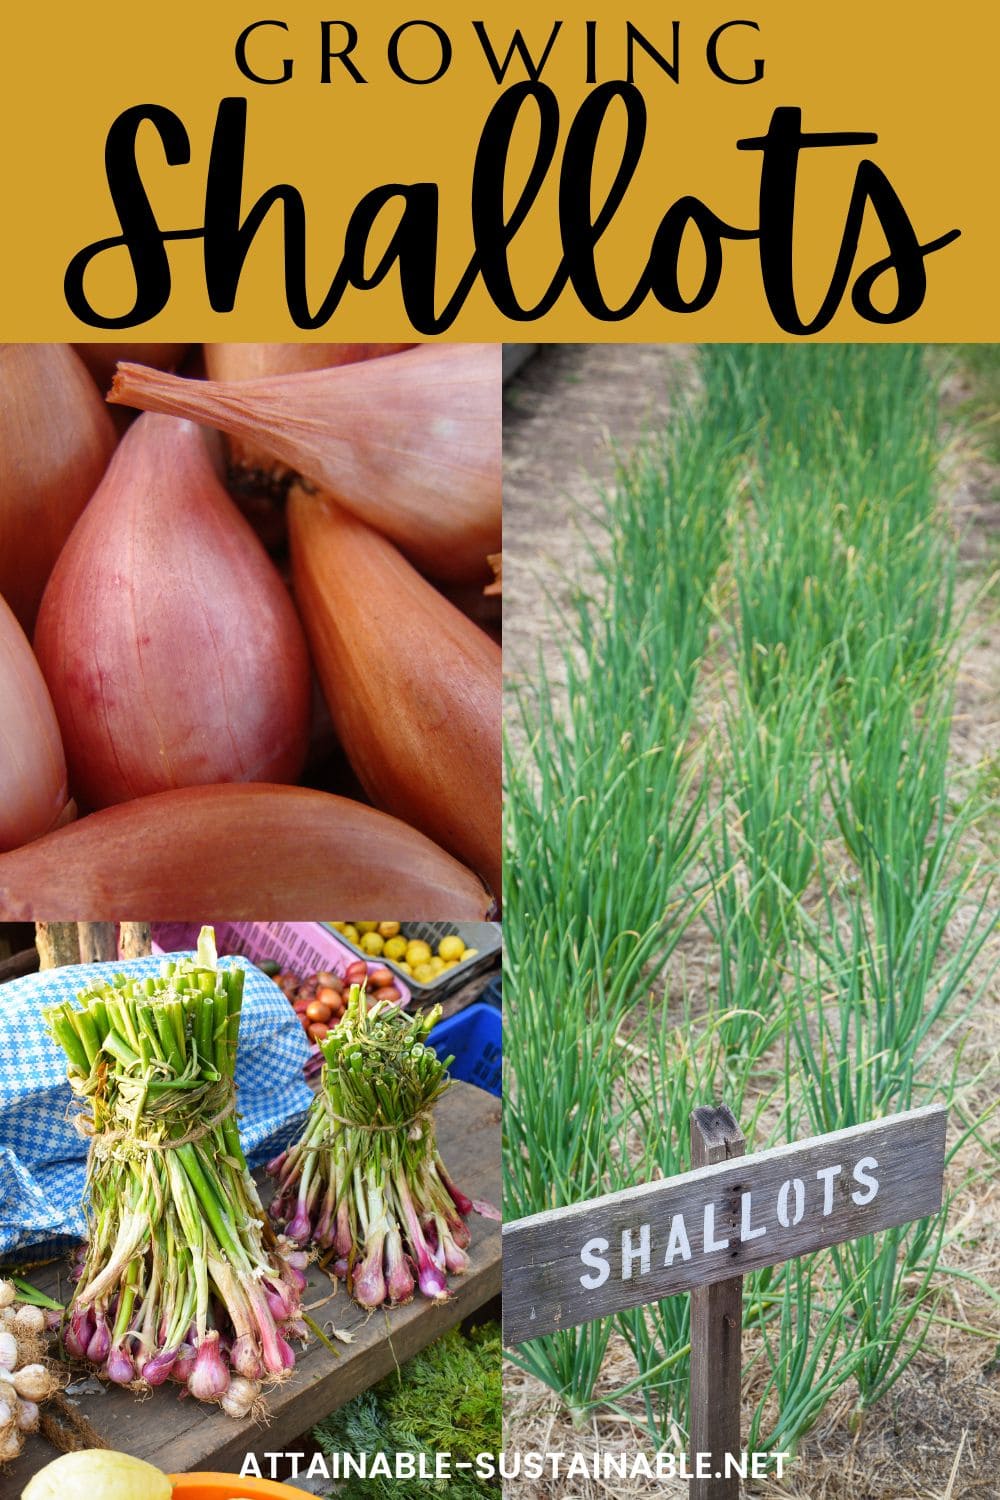 Growing shallots on top with pictures of shallots newly growing with a garden sign, 2 bunches of pink shallots, and a pile of shallots.